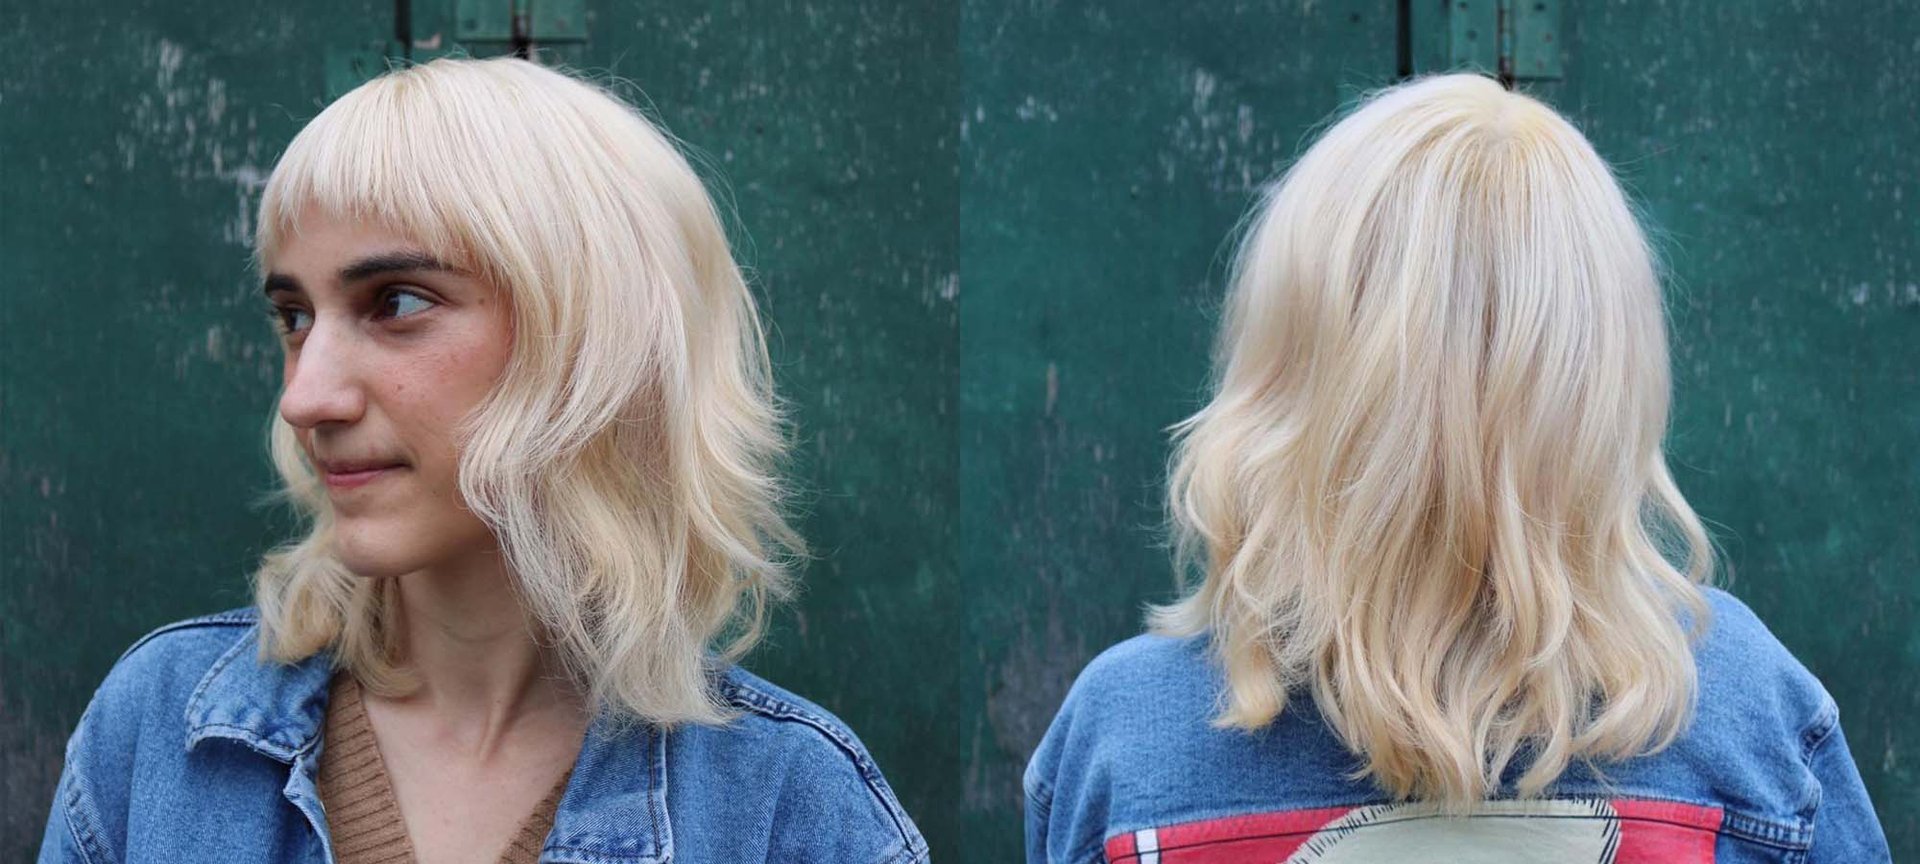 4. "The Difference Between Baby Blonde and Platinum Blonde Highlights" - wide 1